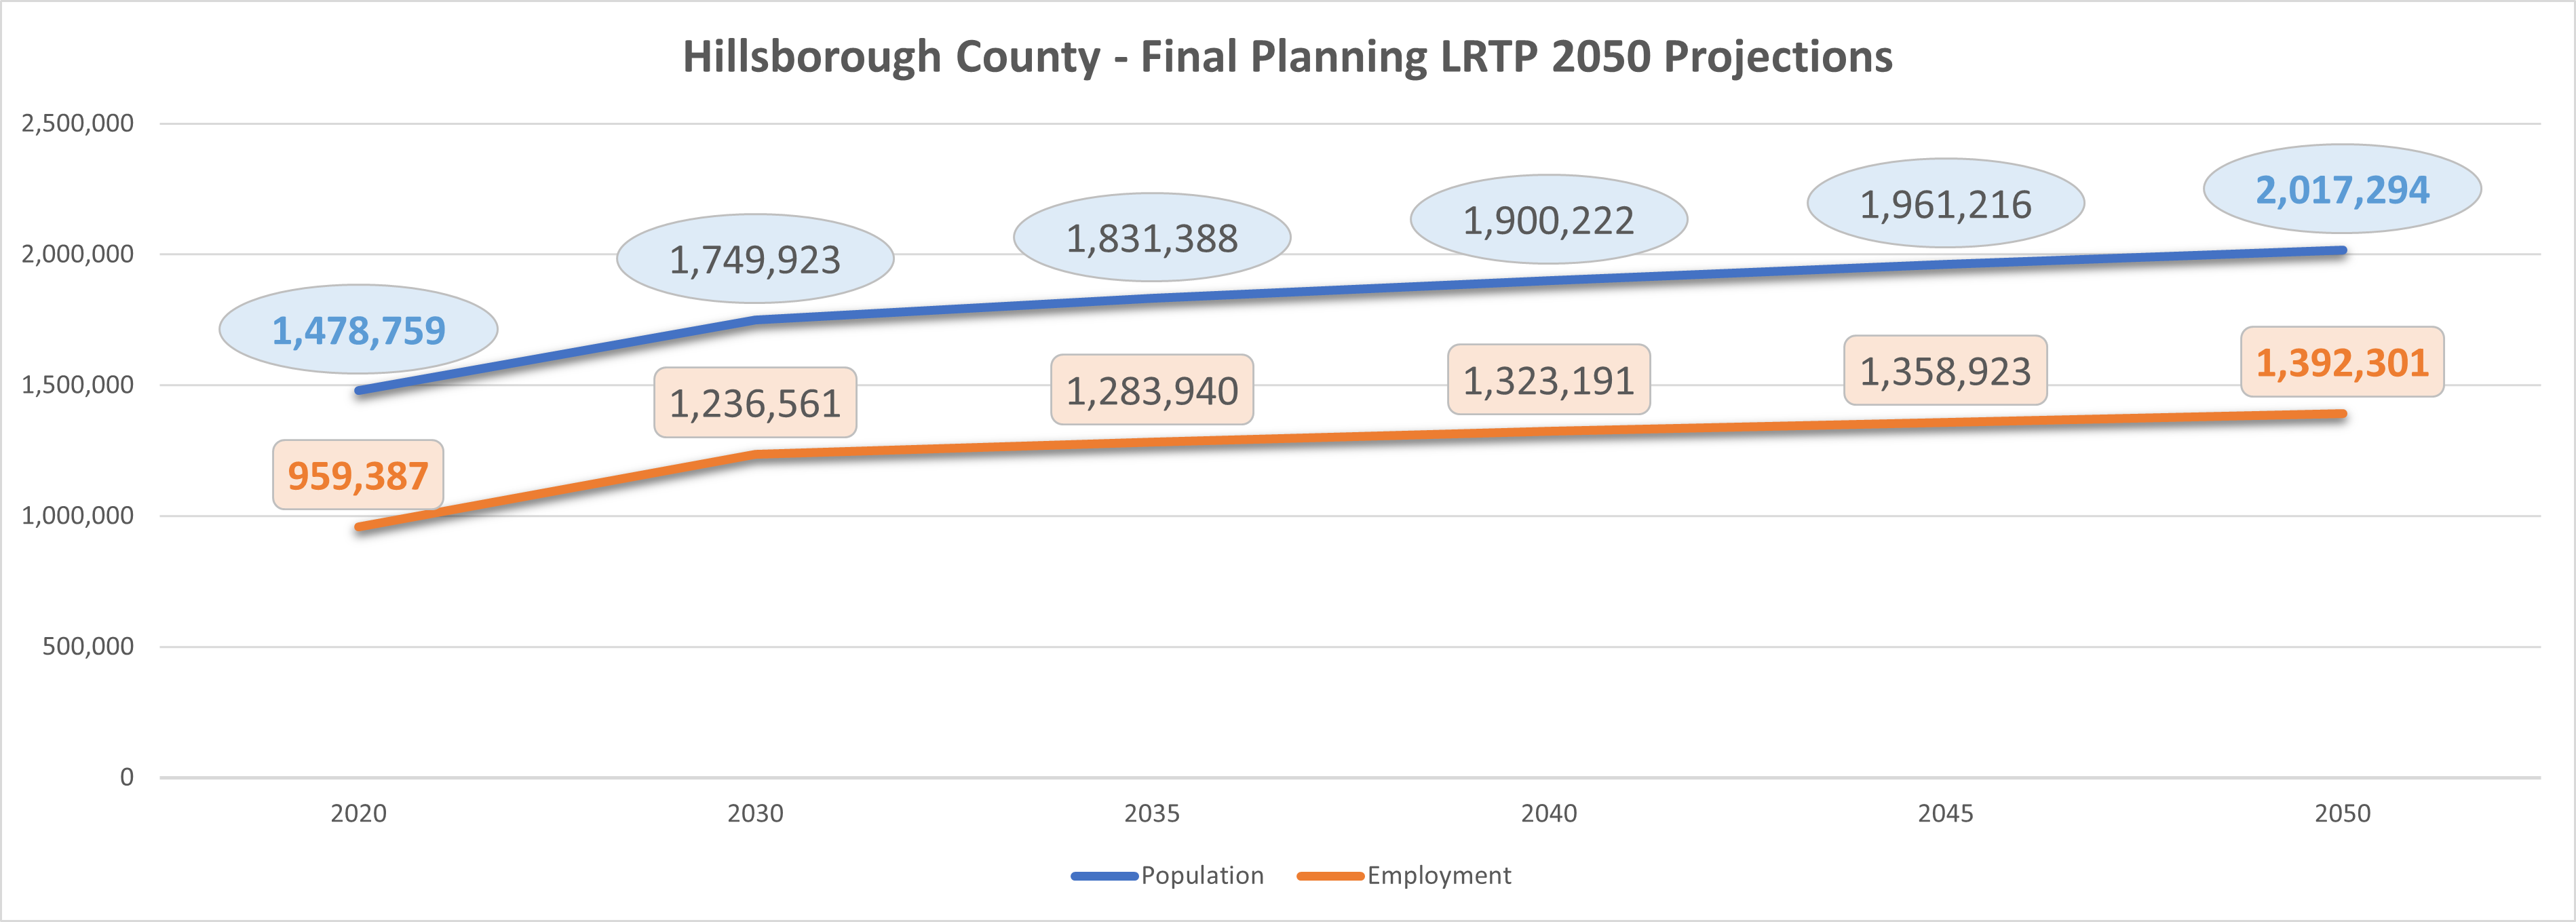 This line chart shows 2020 population and employment estimates for Hillsborough County. Moreover, it shows 2030-2050 population and employment projections. Population is expected to grow from 1.5 million people in 2020 to 2 million people in 2050. Employment is expected to grow from 960,000 jobs in 2020 to 1.4 million jobs in 2050.